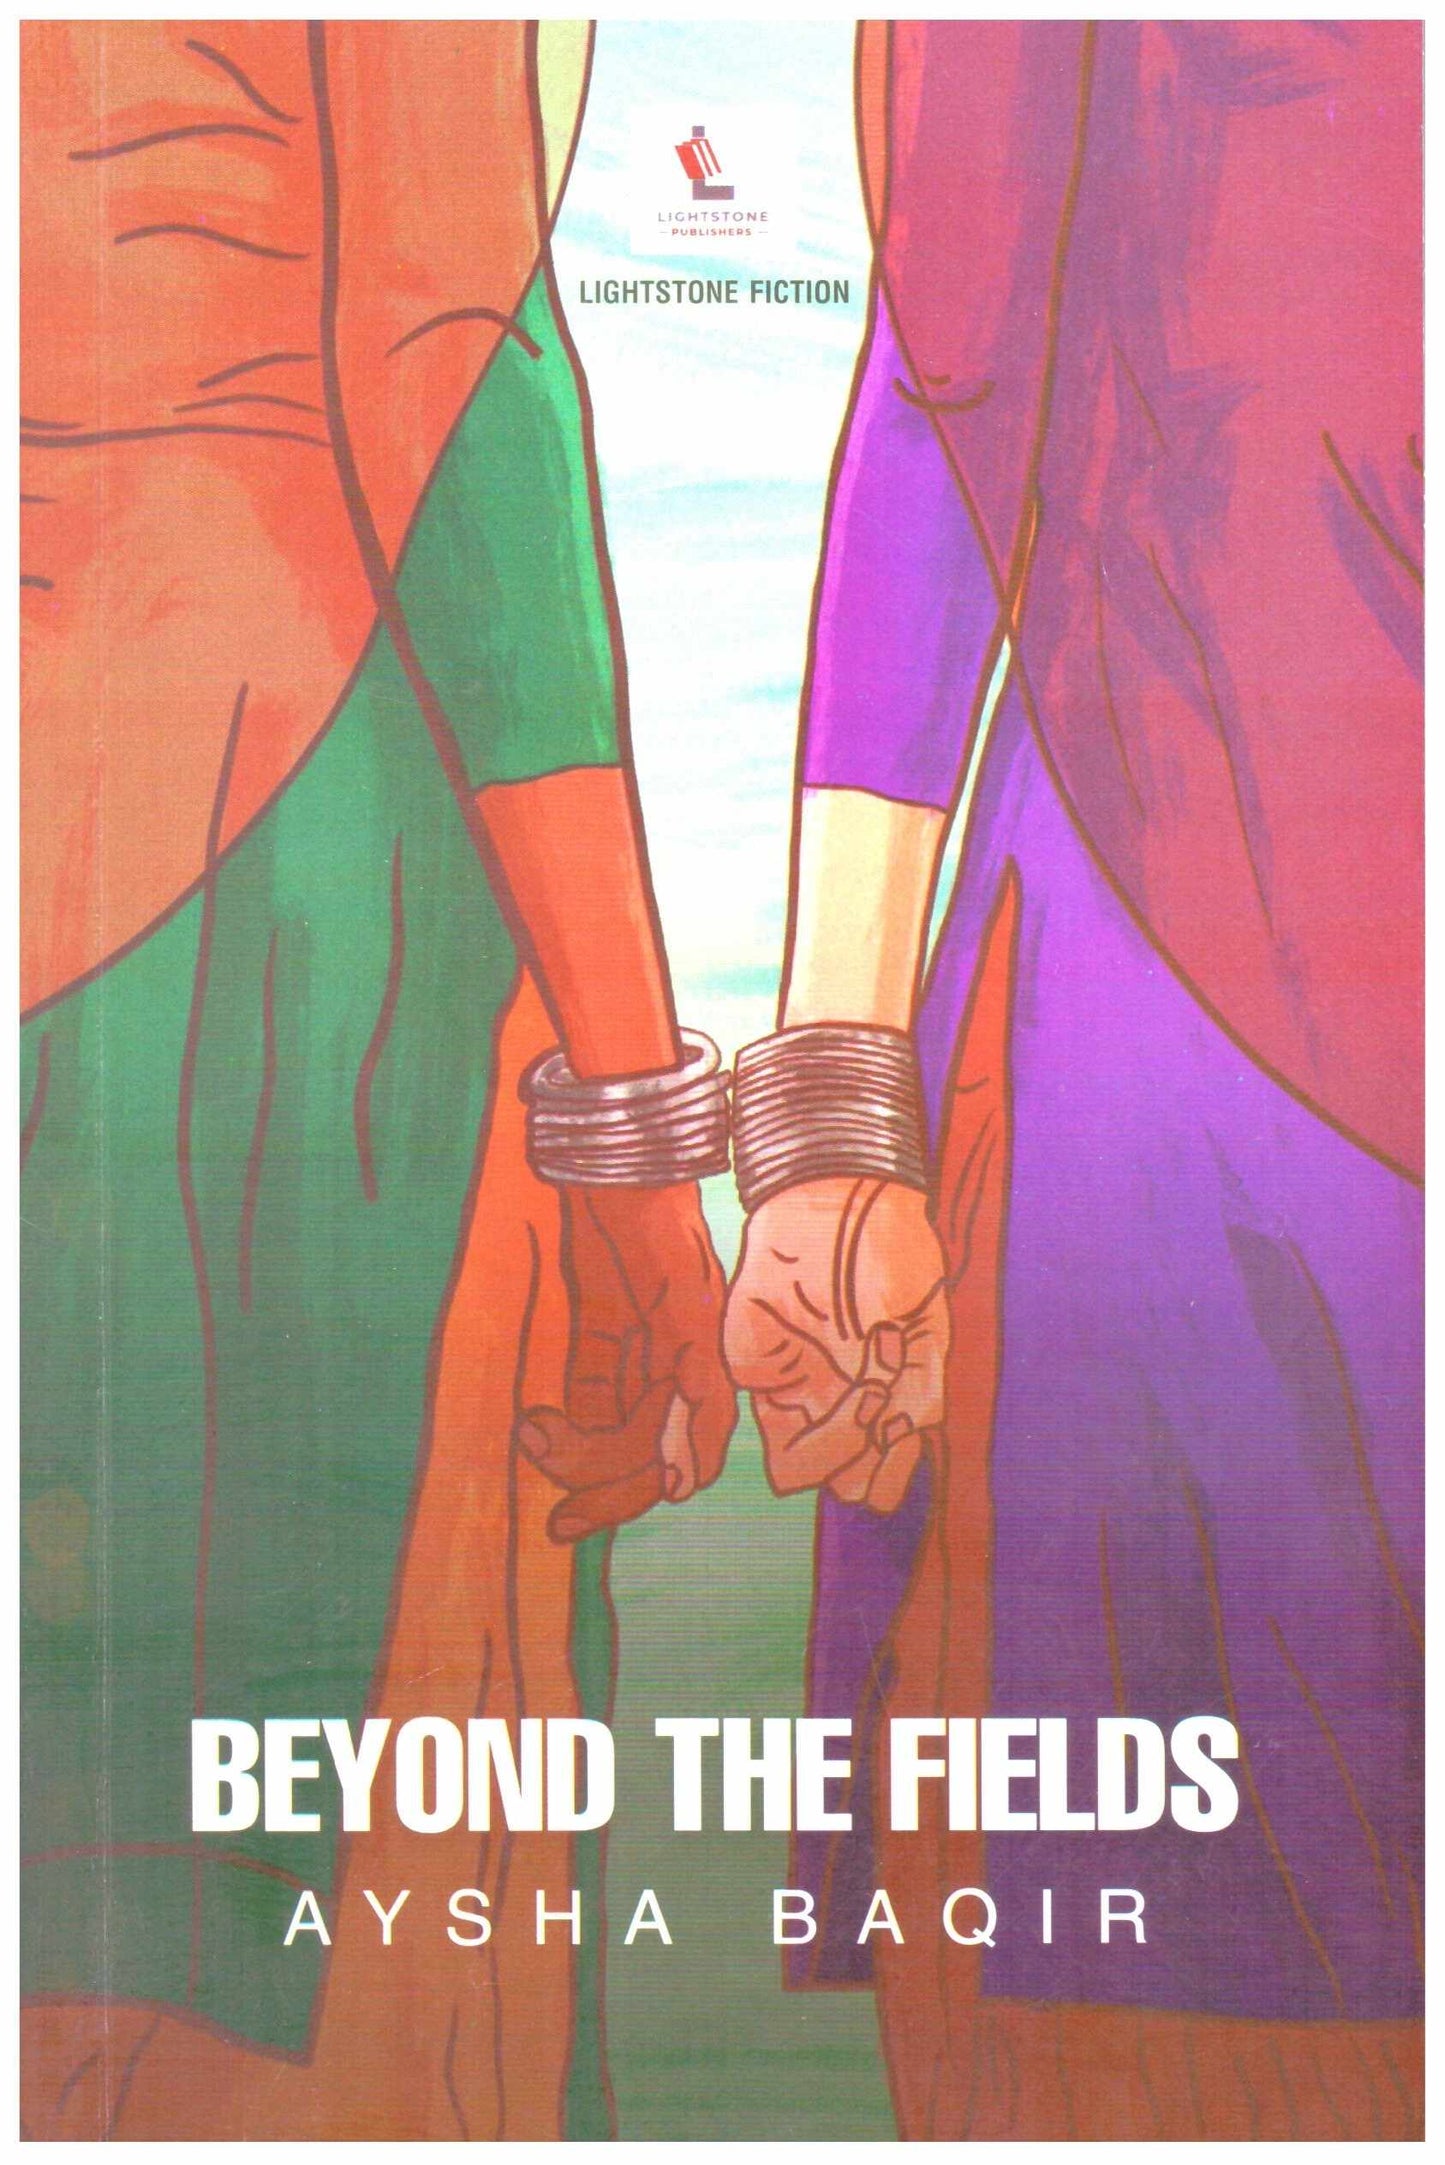 Beyond the Fields by Pakistani Author Aysha Baqir available online in Pakistan at Chapters bookstore